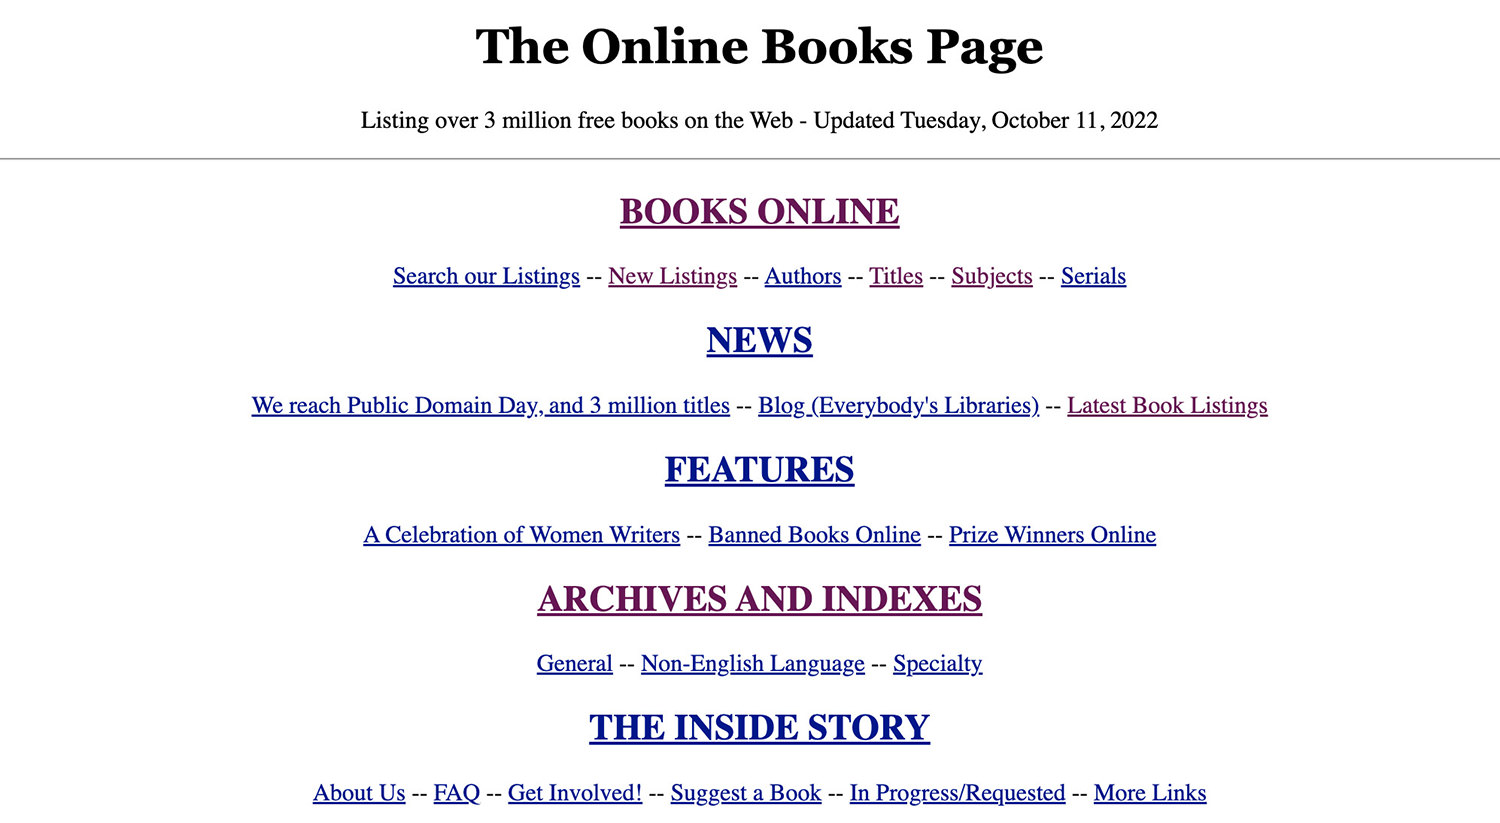 Image of The Online Books Page website